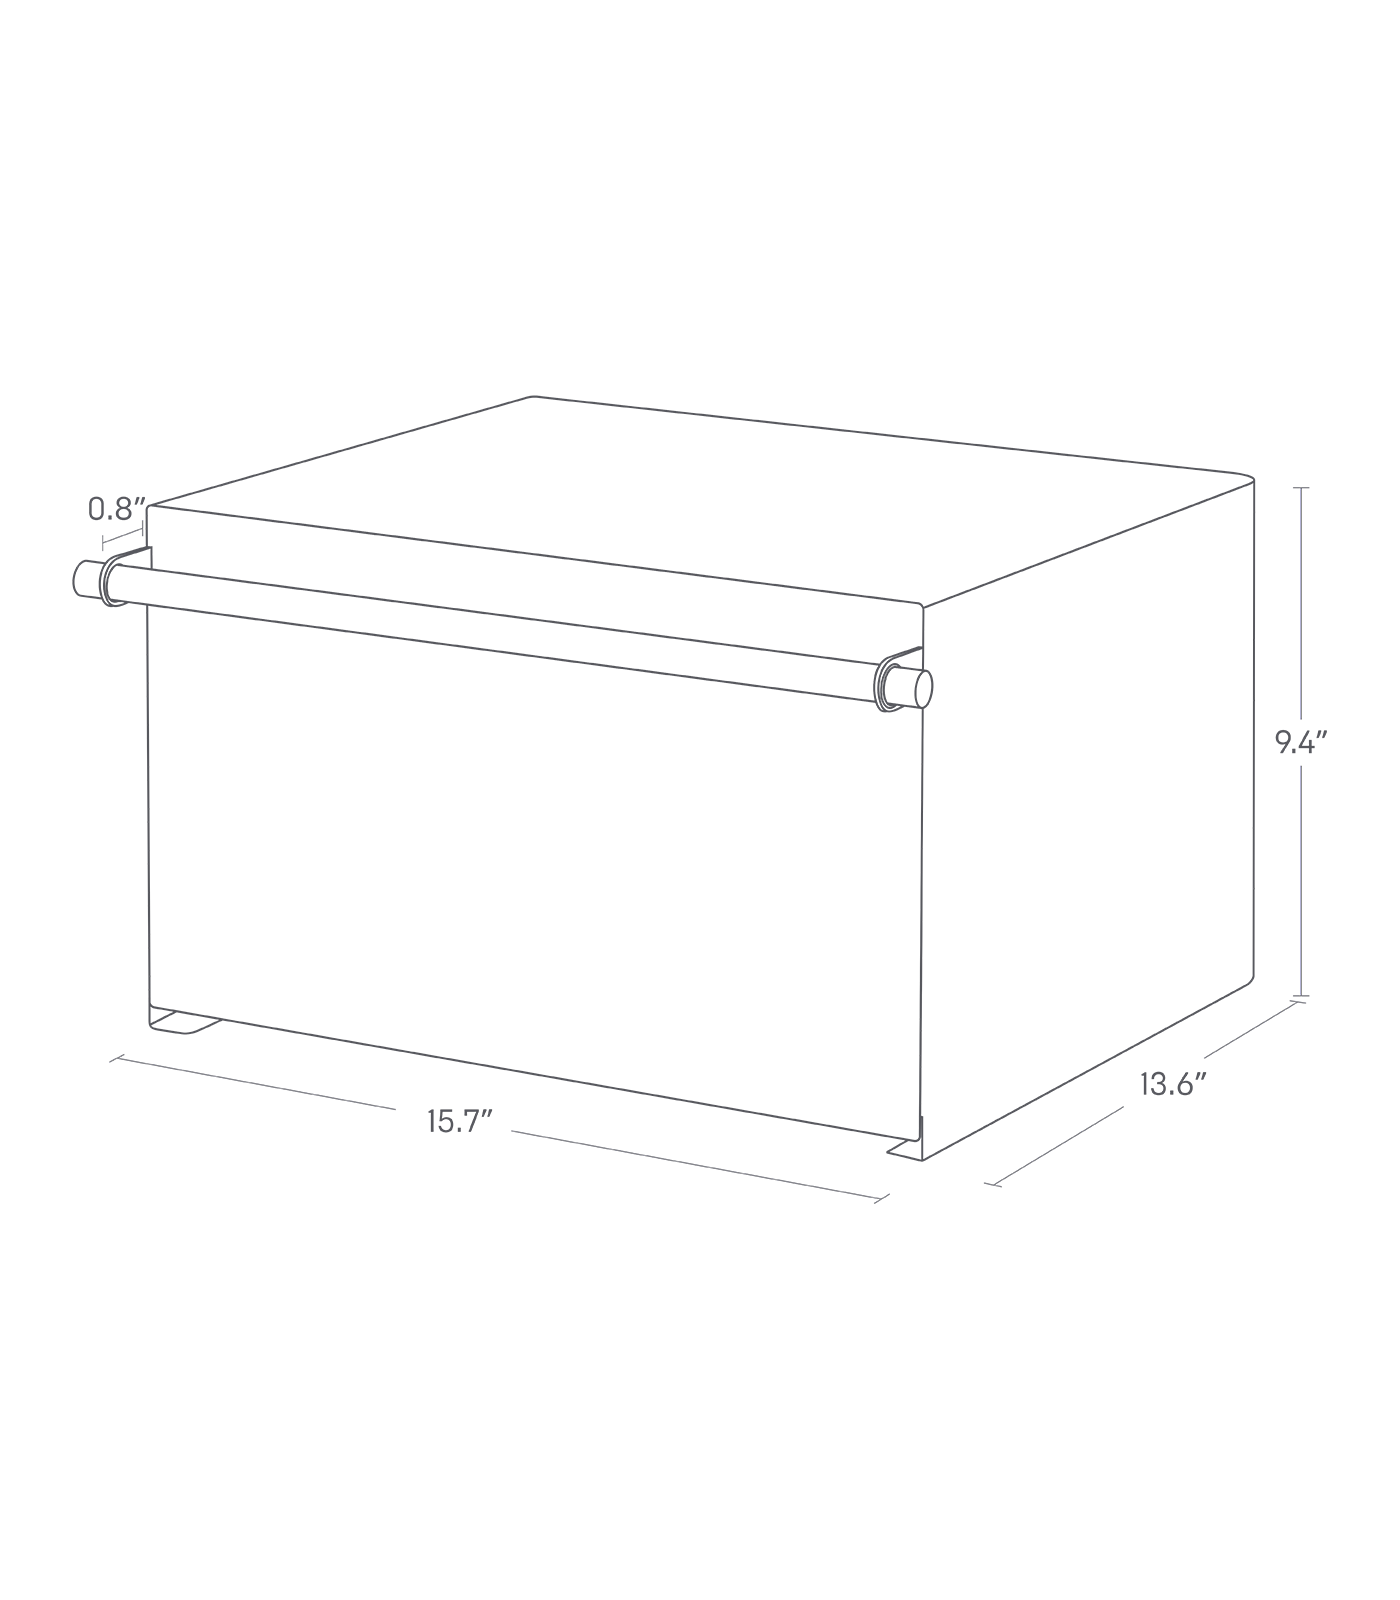 Dimension image of Horizontal Bread Box with a width of 15.7